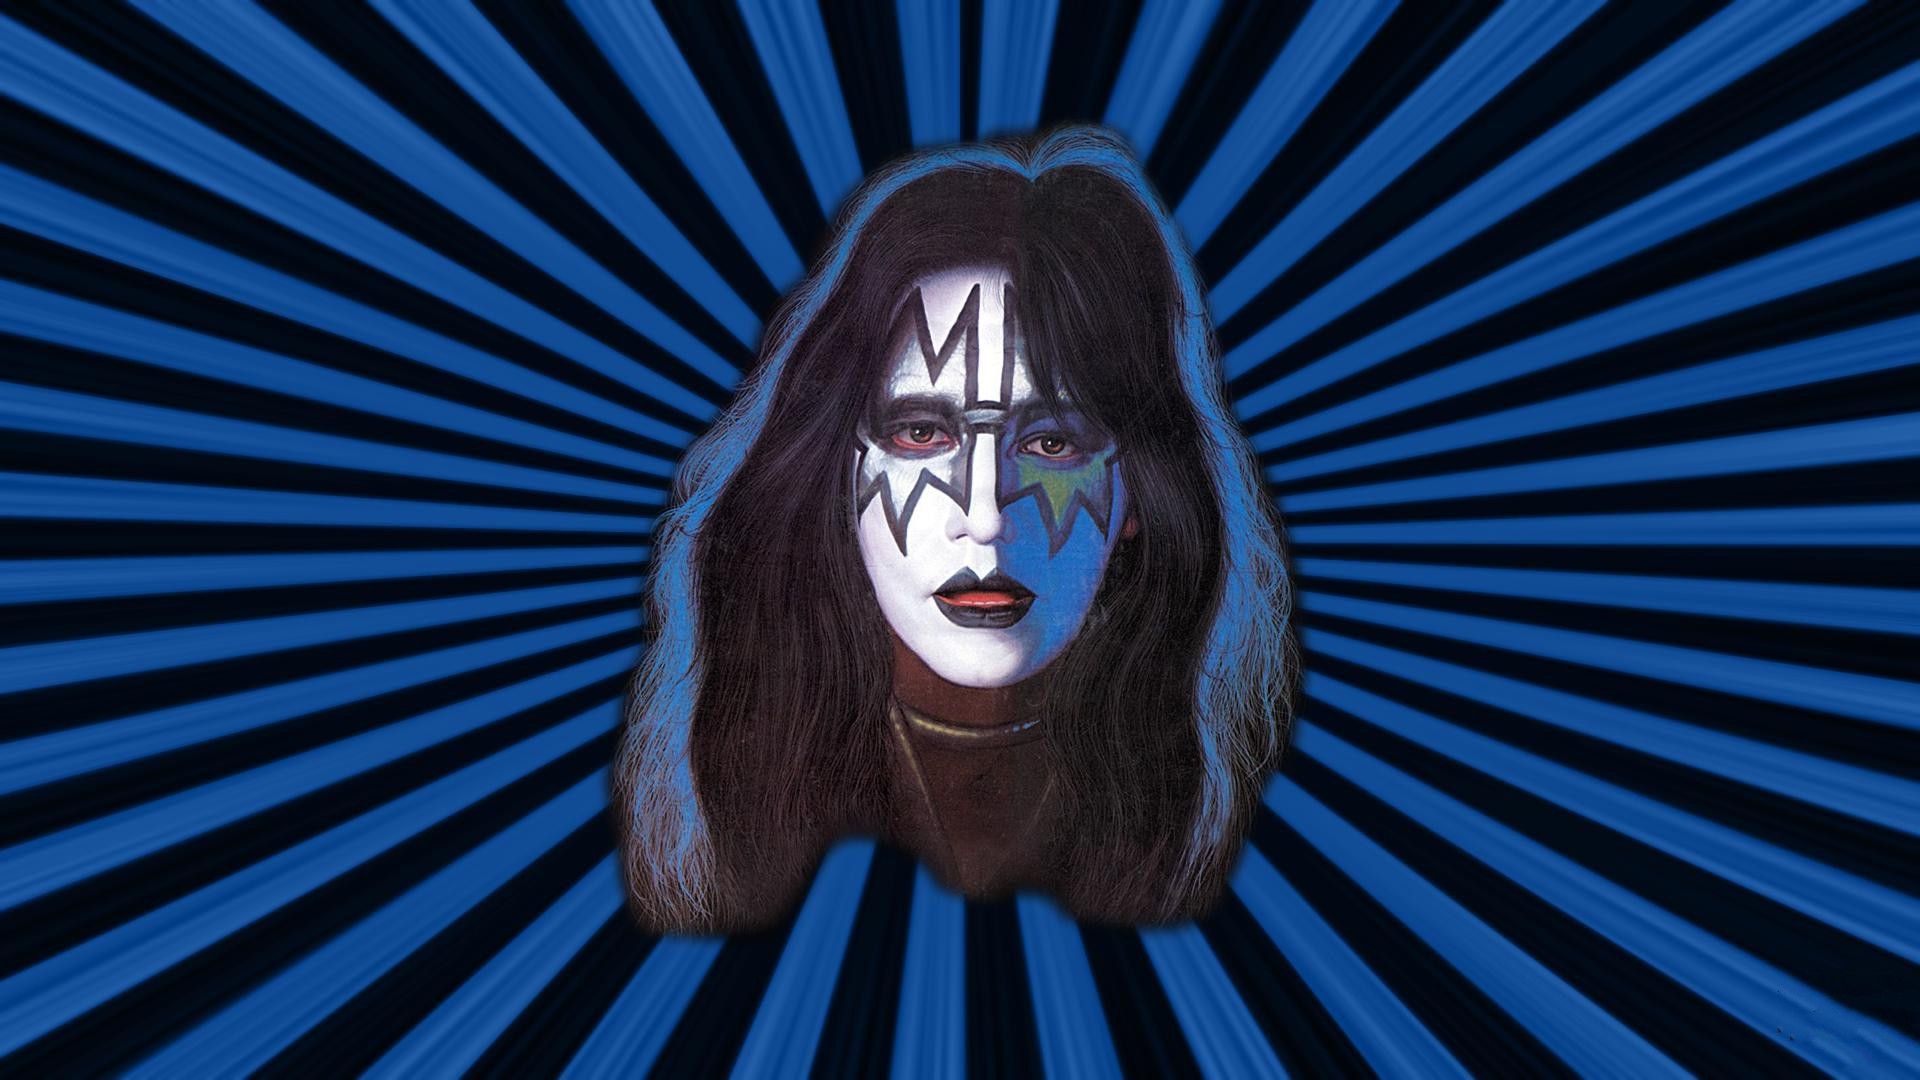 Ace Frehley Wallpapers HD Wallpapers Desktop Image Download Free Windows Wa...